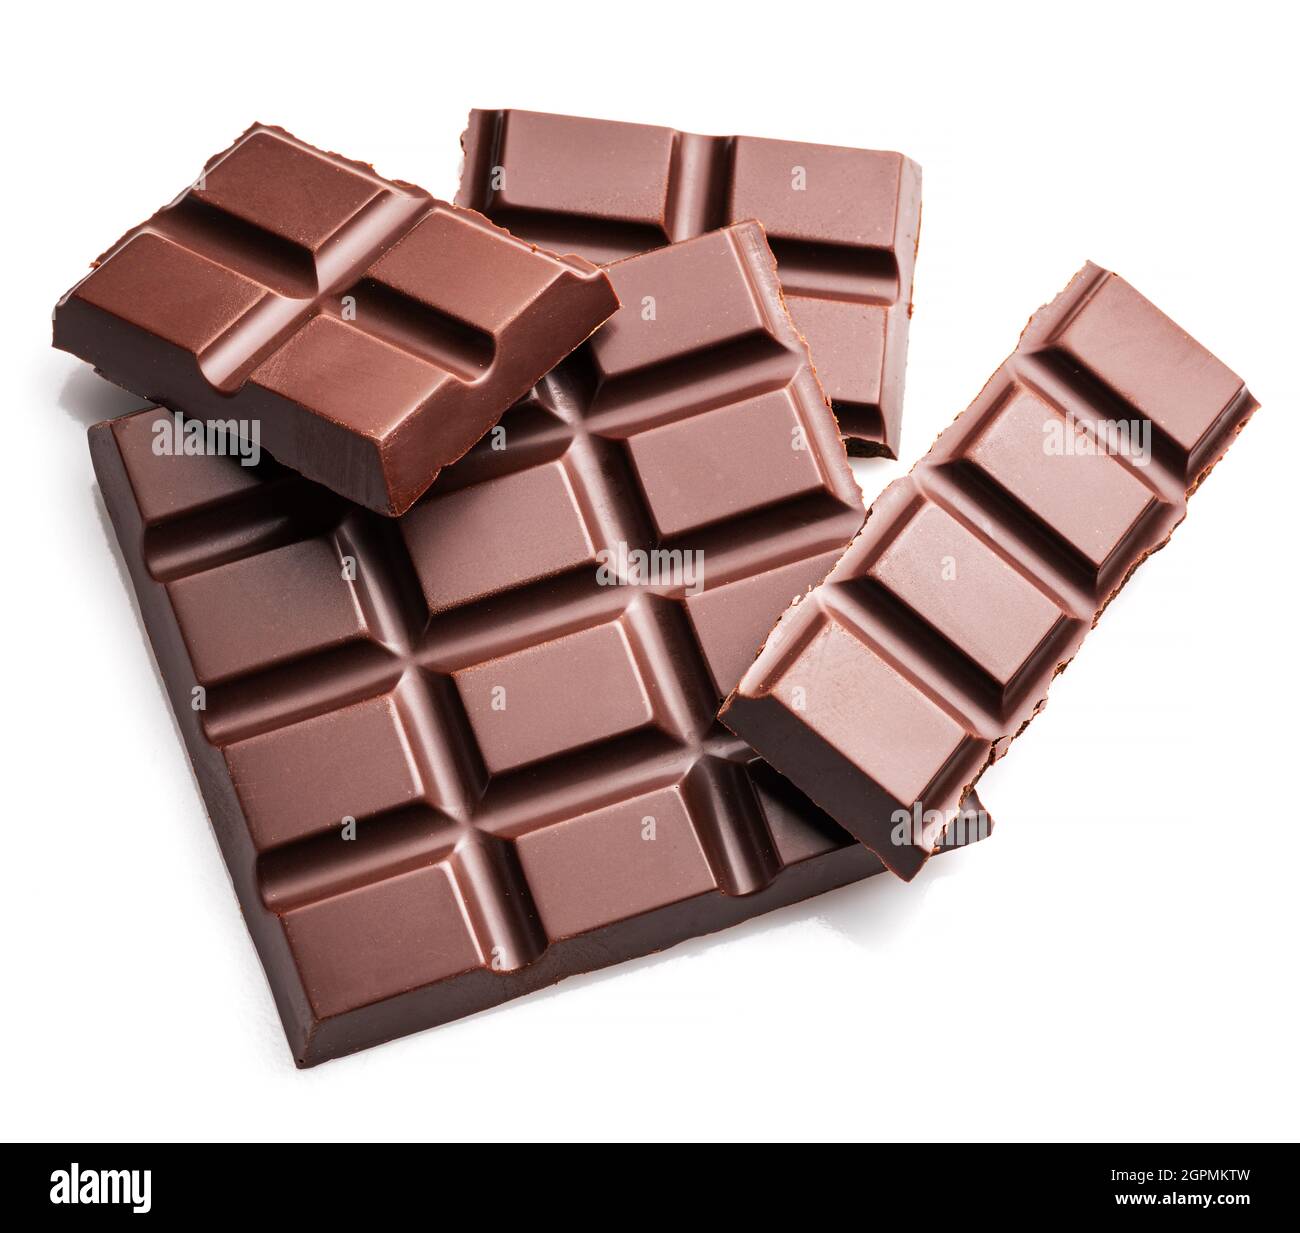 Pieces of dark chocolate bar isolated on white background. Sweet food is made of cocoa and sugar. Stock Photo